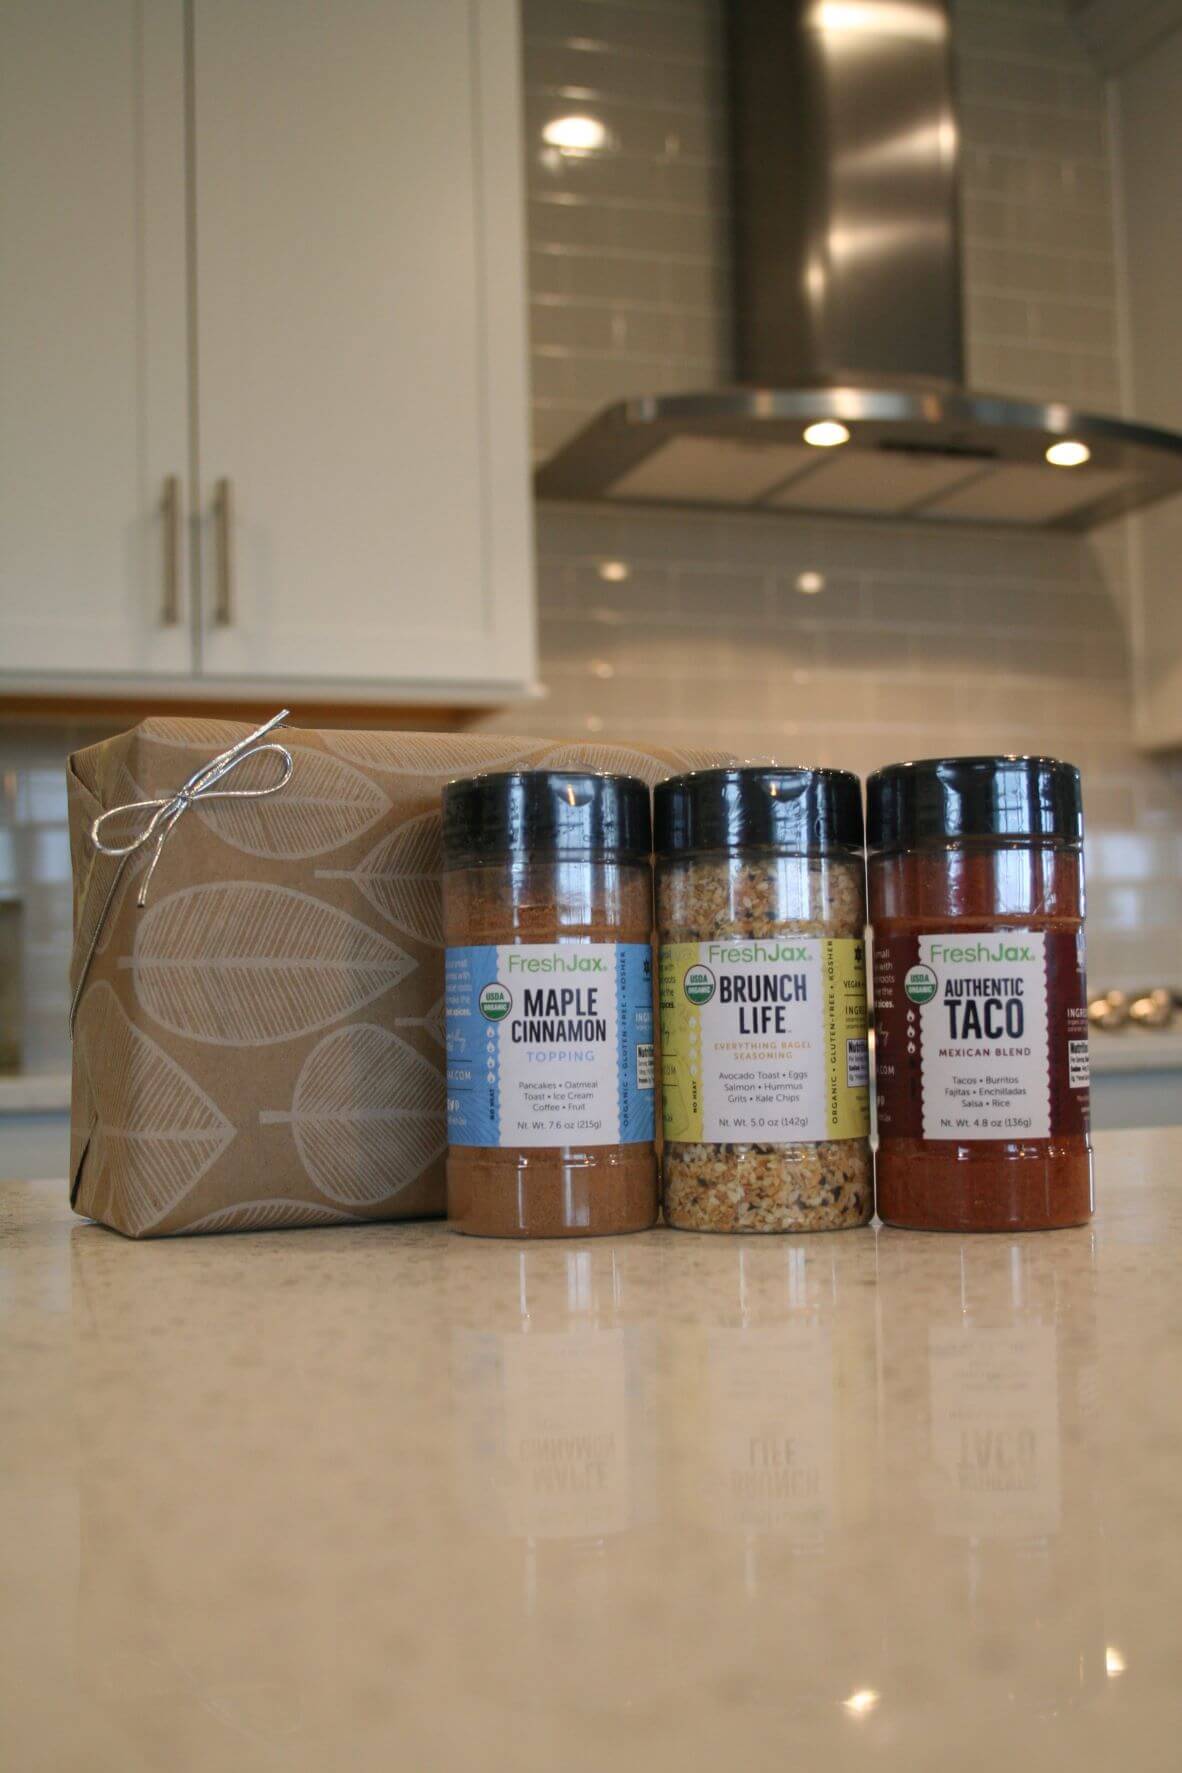 FreshJax organic spices large bottle trio featuring Maple Cinnamon, Brunch Life, and Taco